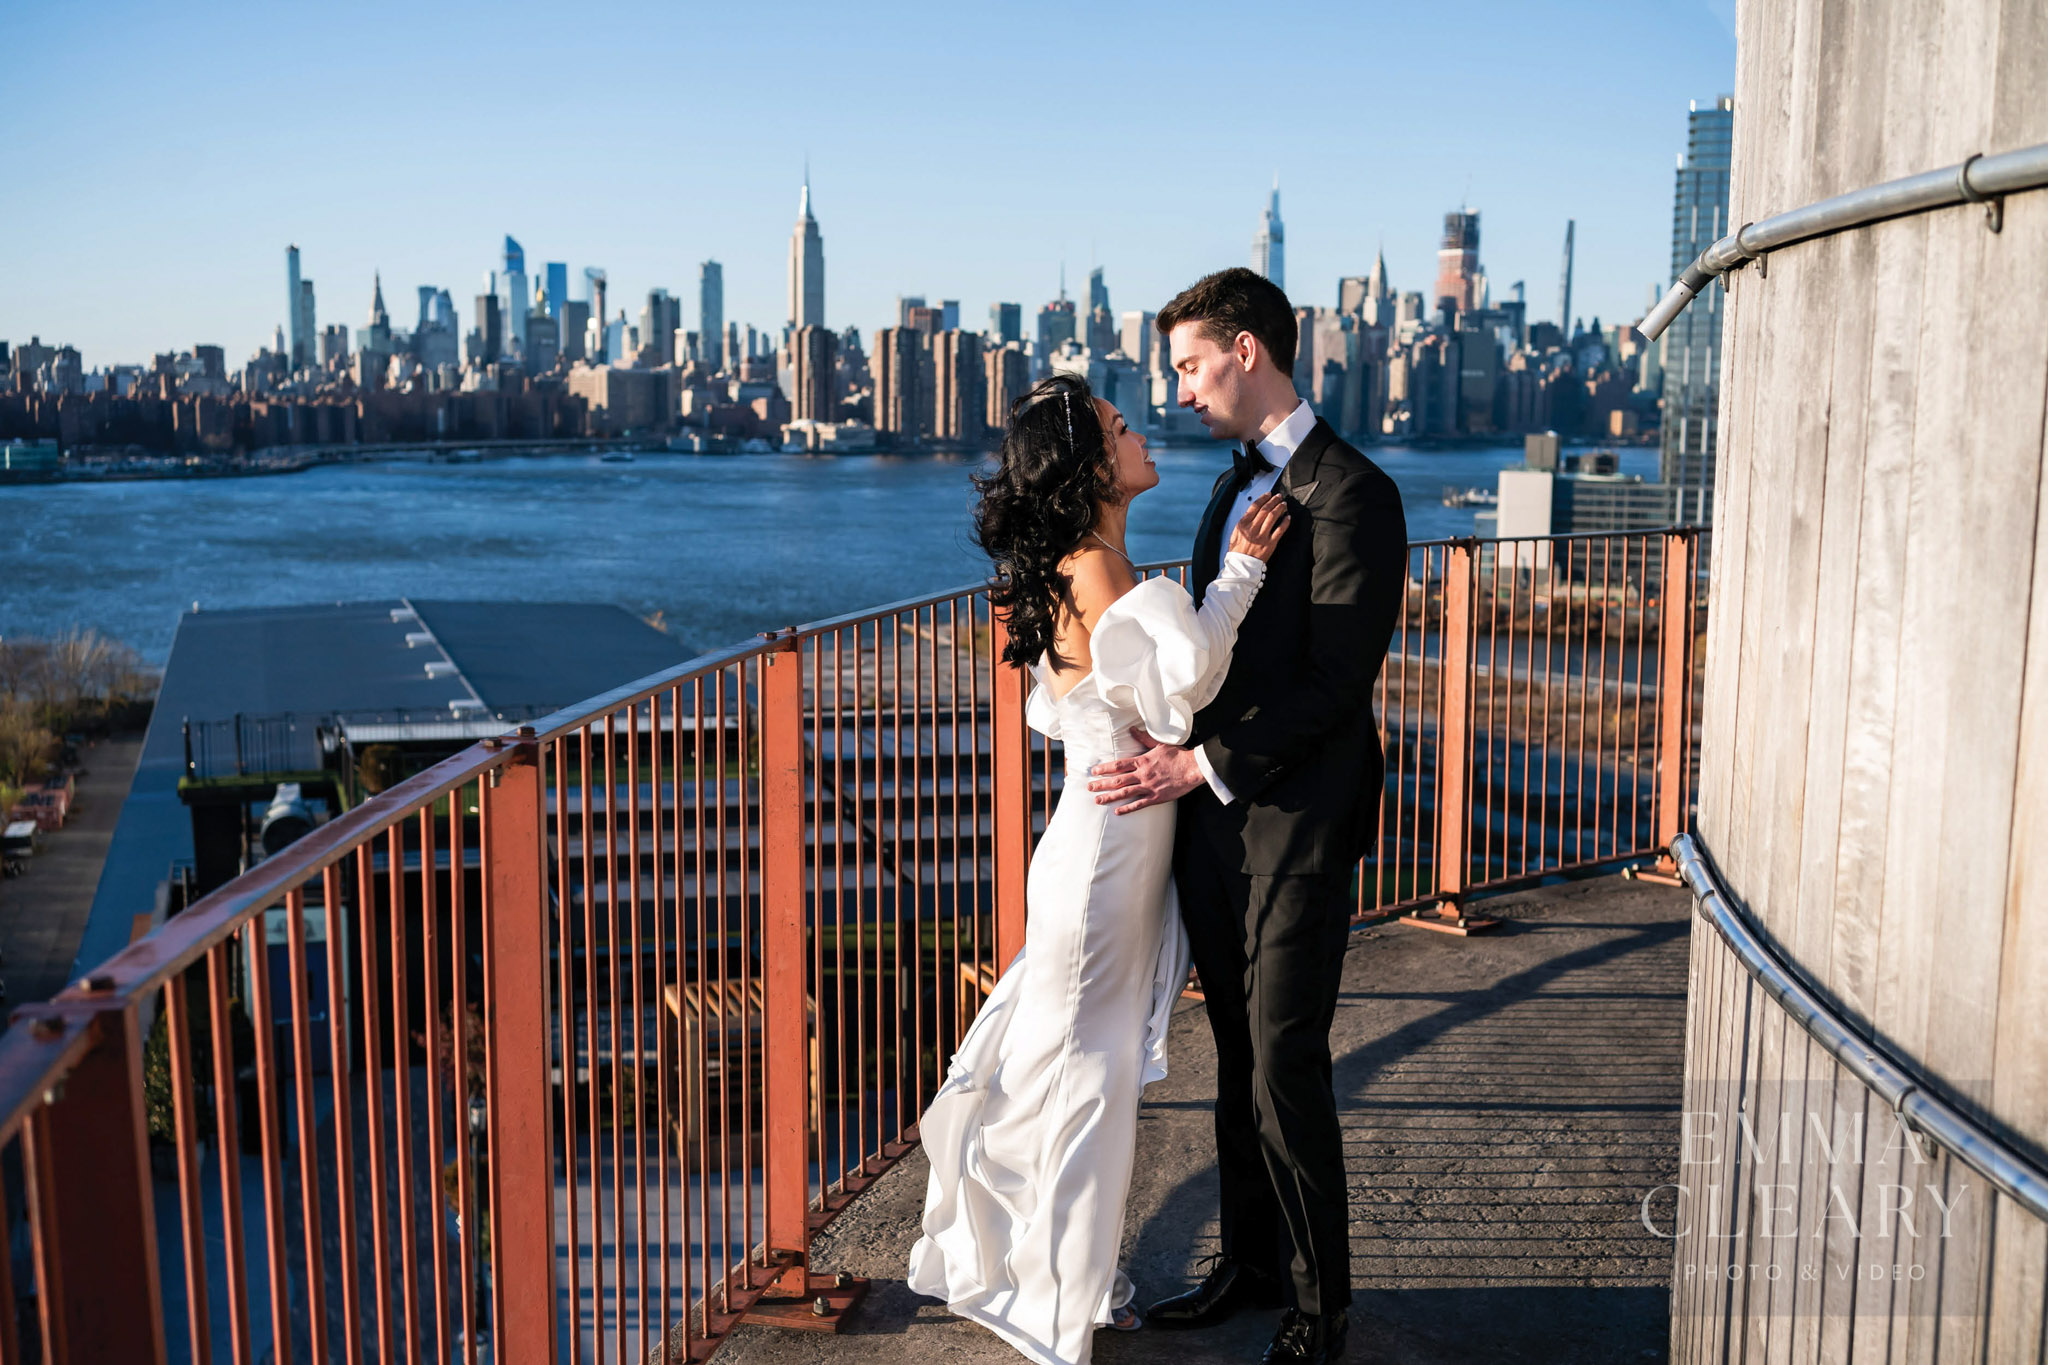 Outside wedding photo with beautiful New York view